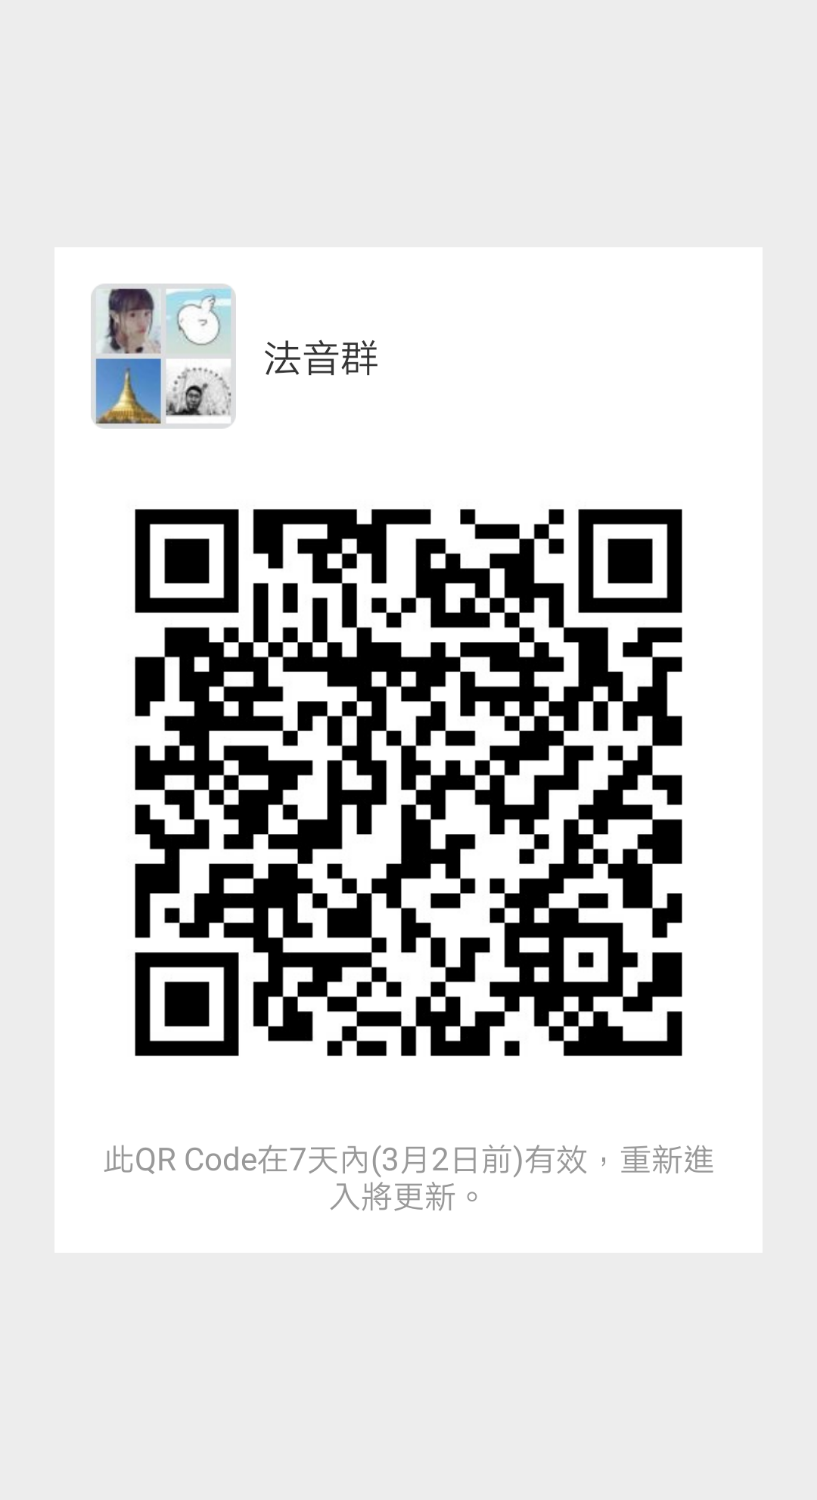 mmqrcode1550923746887.png